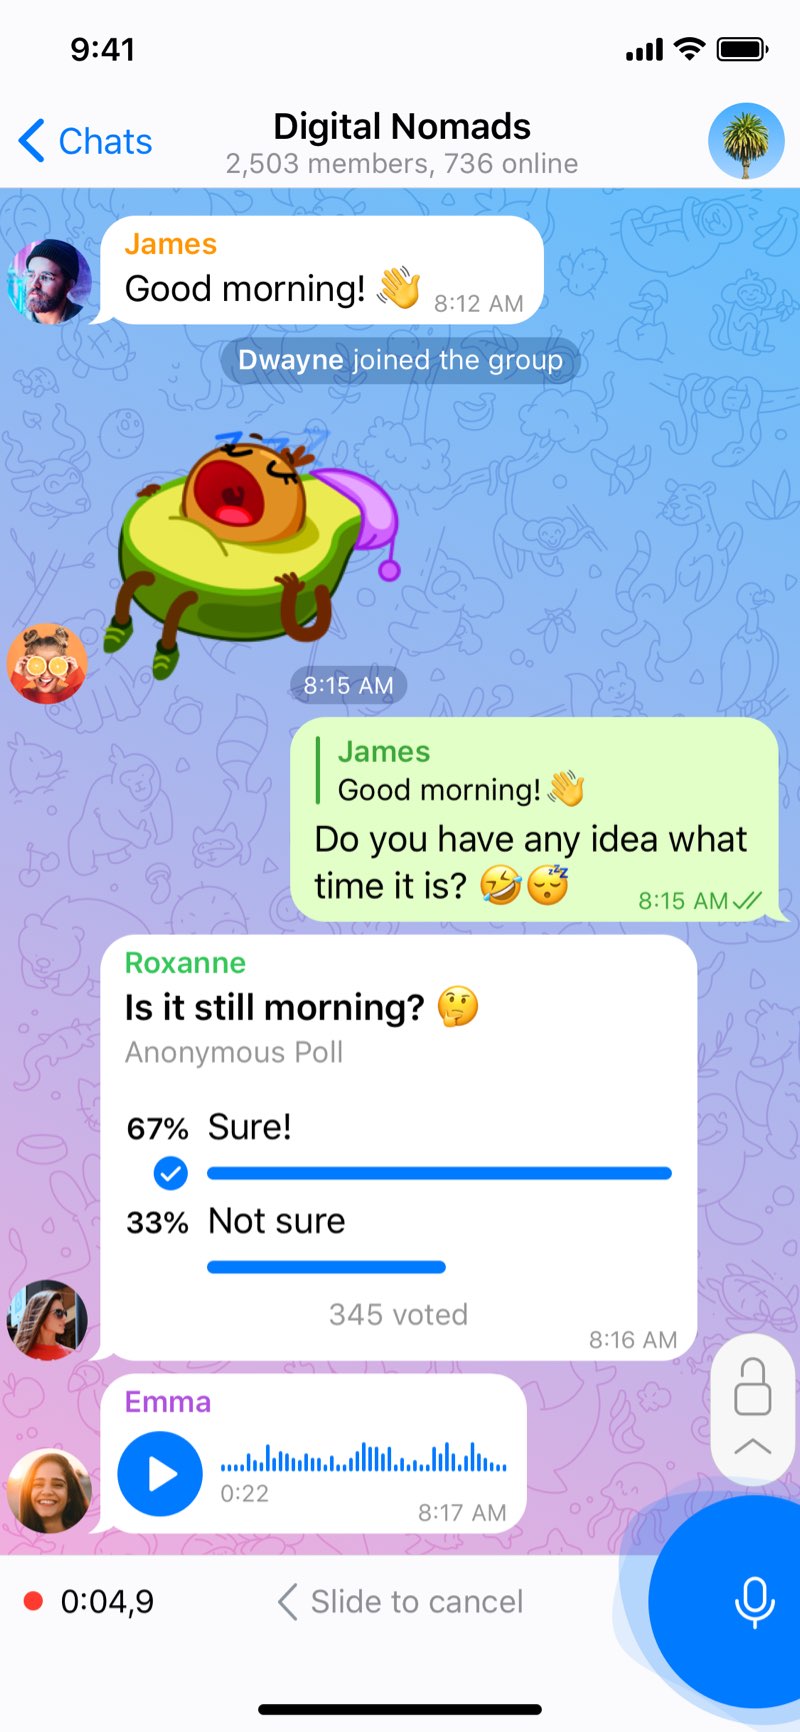 A group chat with 2,500 members and a poll